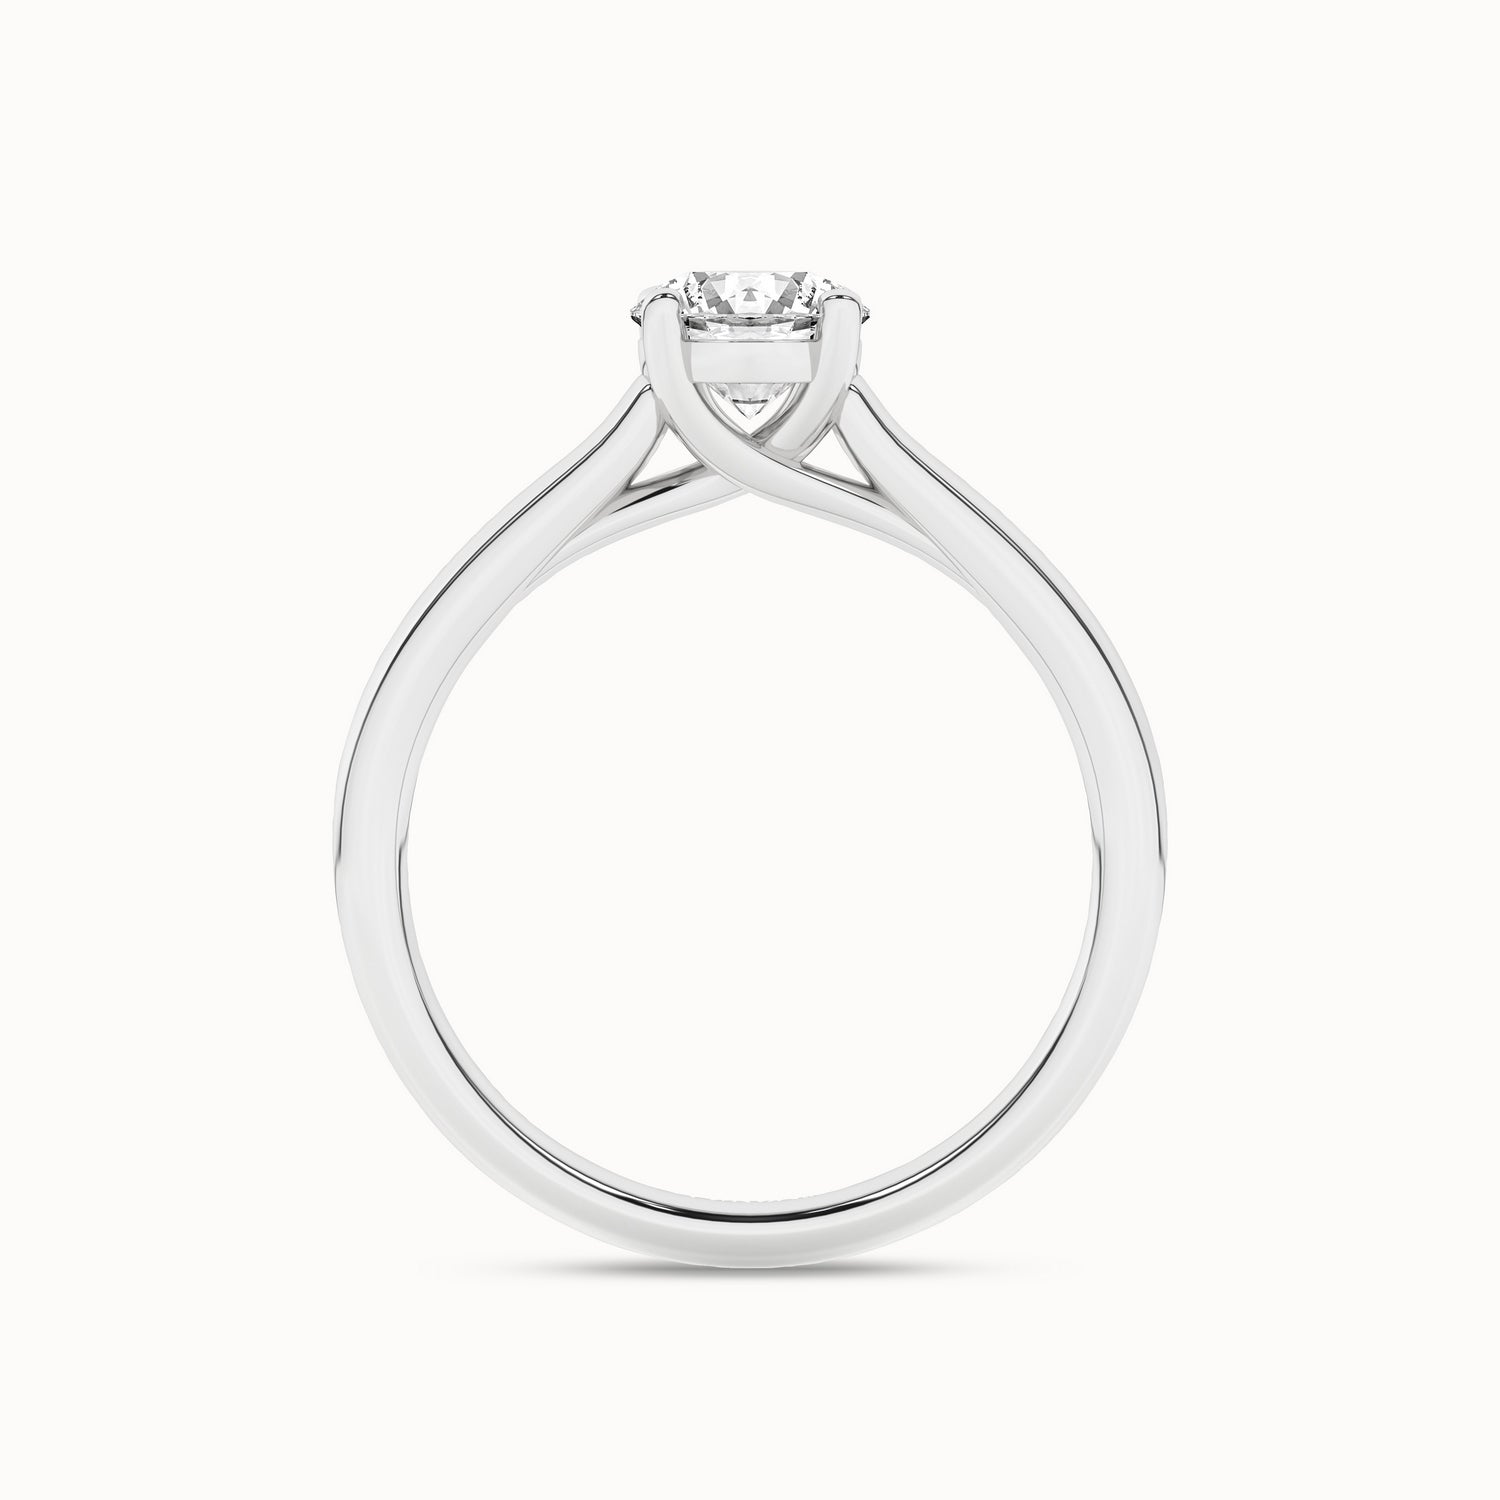 Timeless Round Ring_Product Angle_3/4Ct - 2